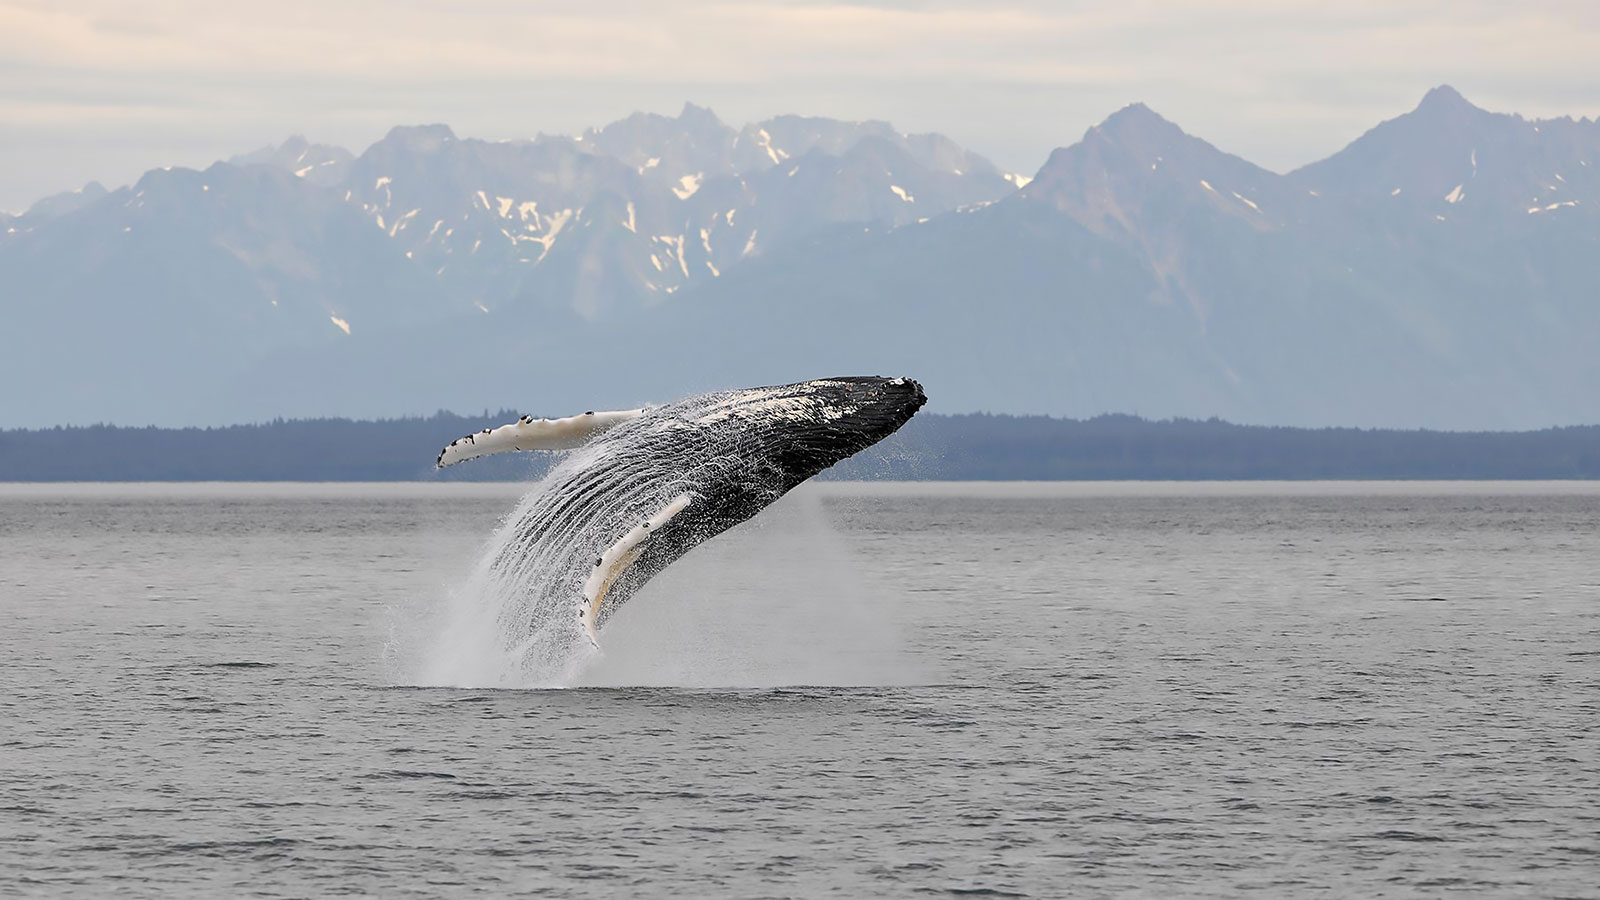 Alaska Whale Watching Tour, humpback whales, orcas, whale photography